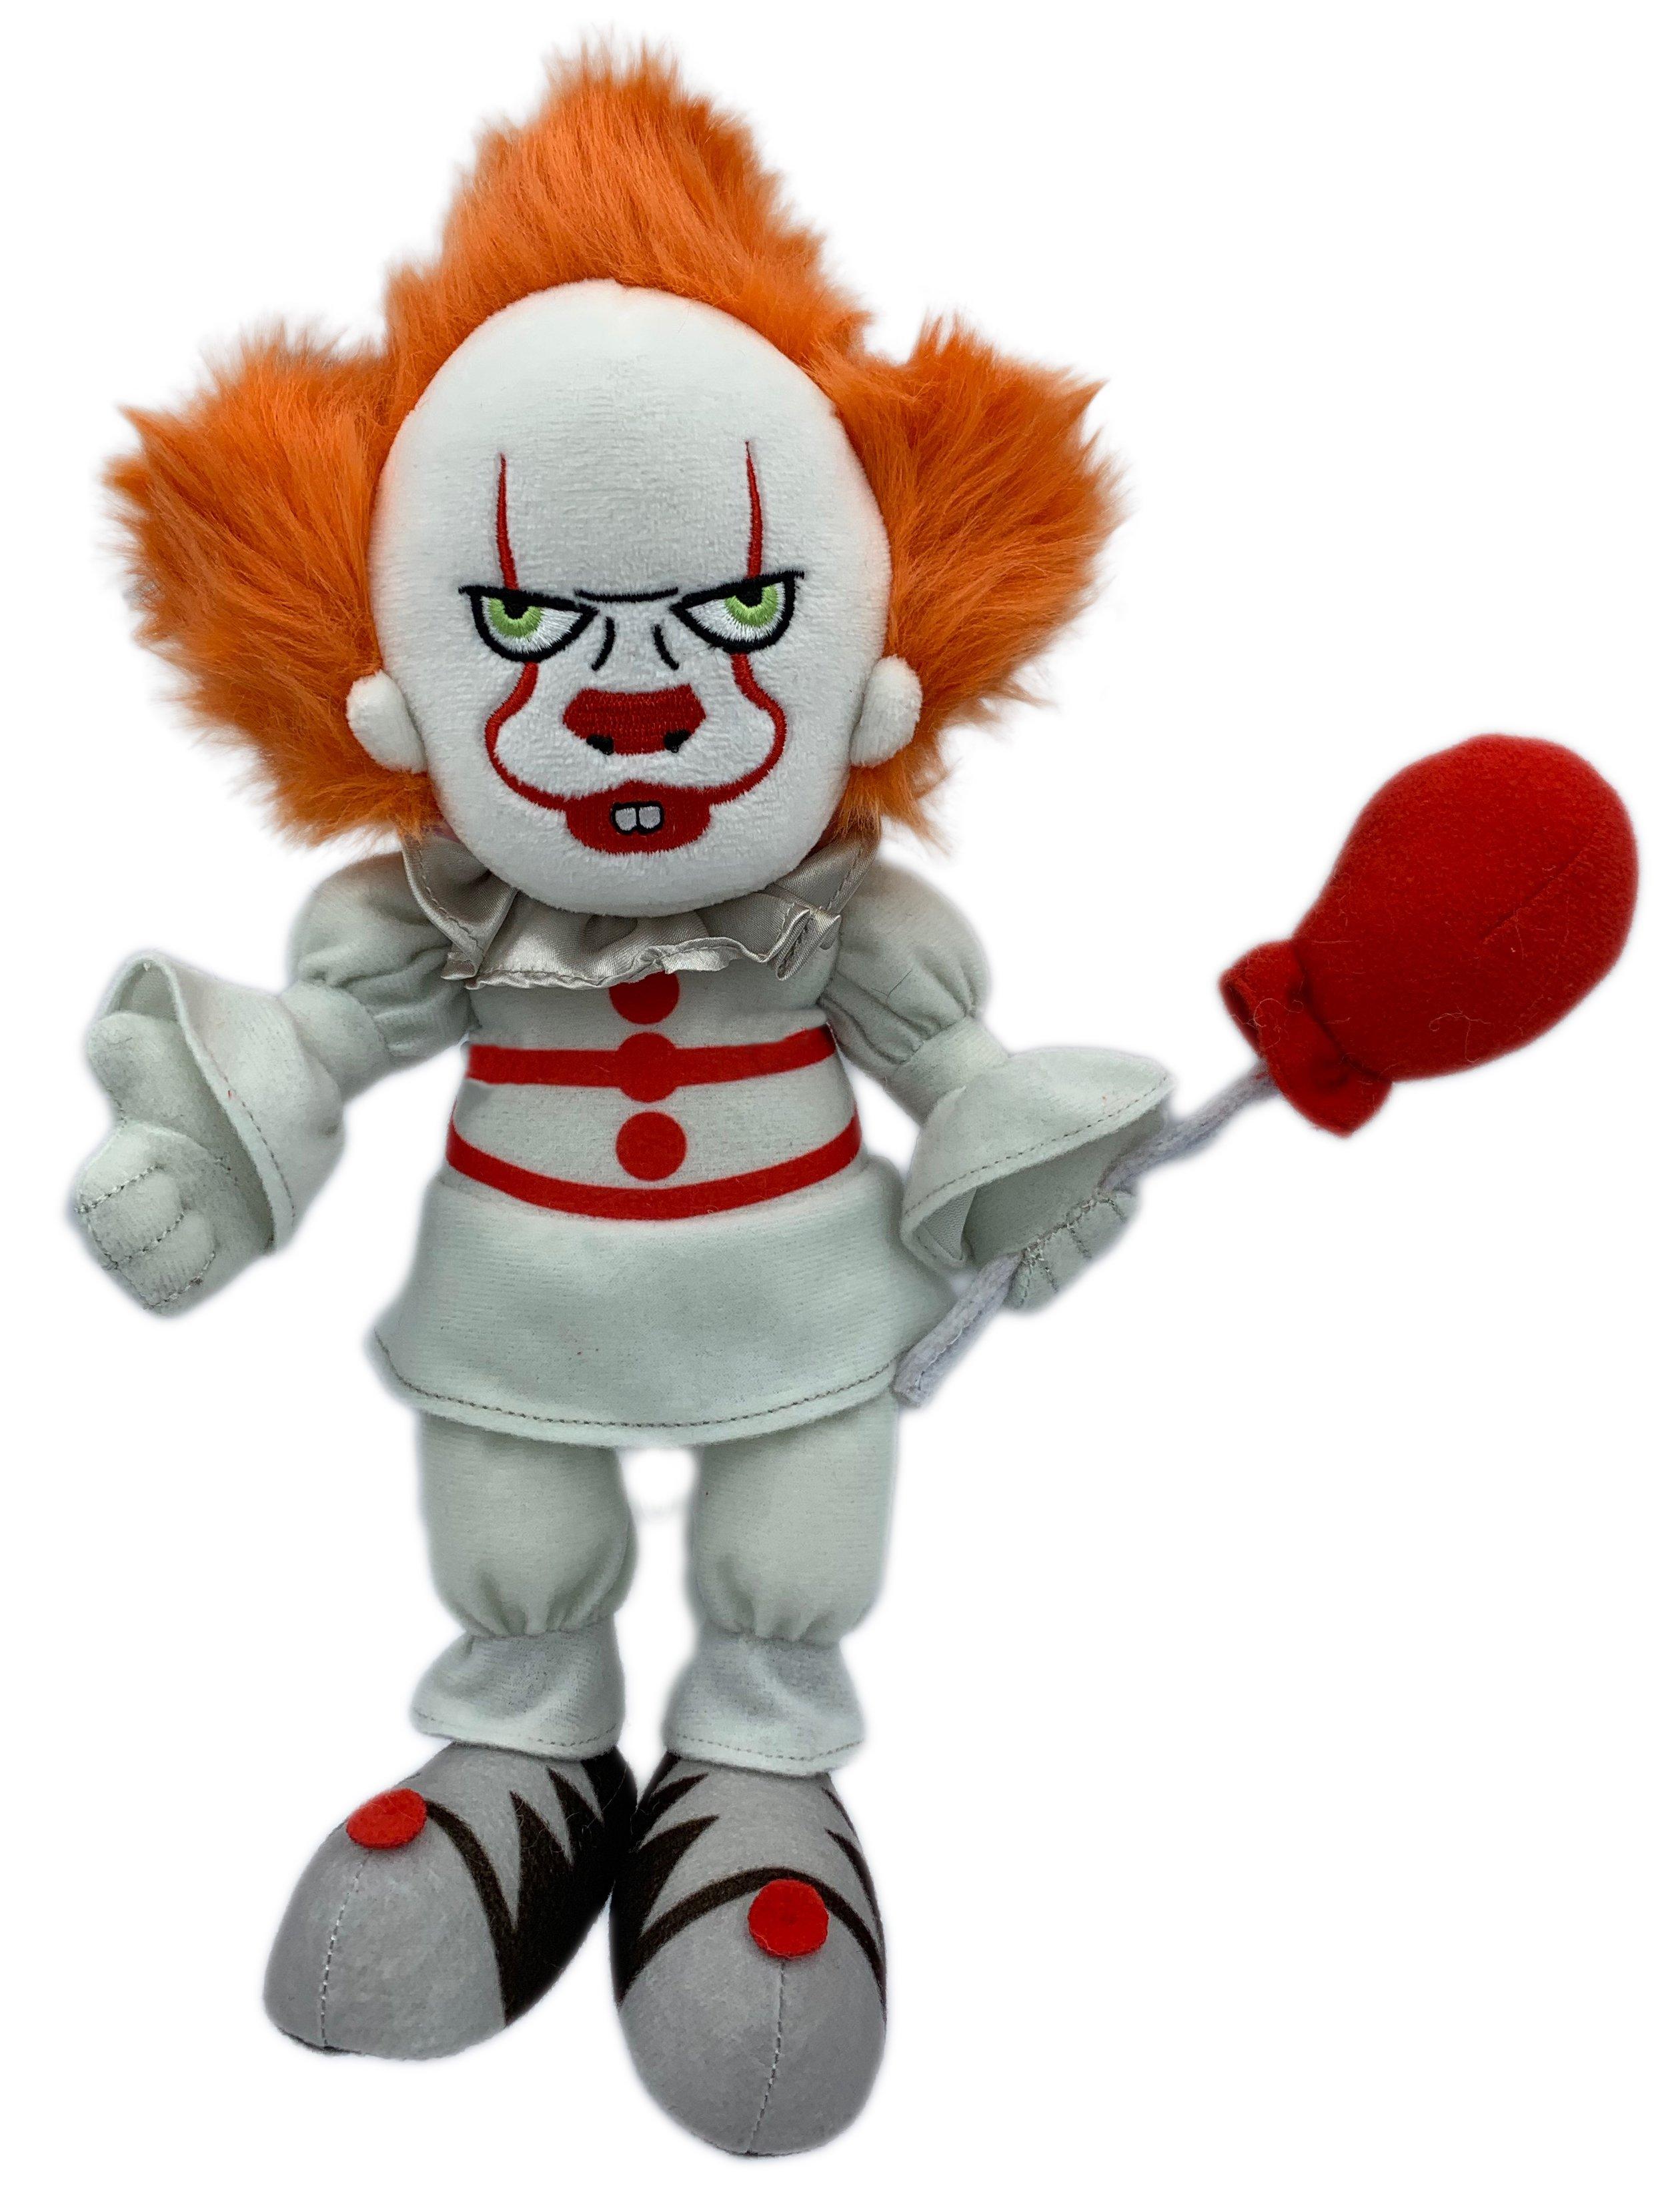 Plush bunny pennywise the clown